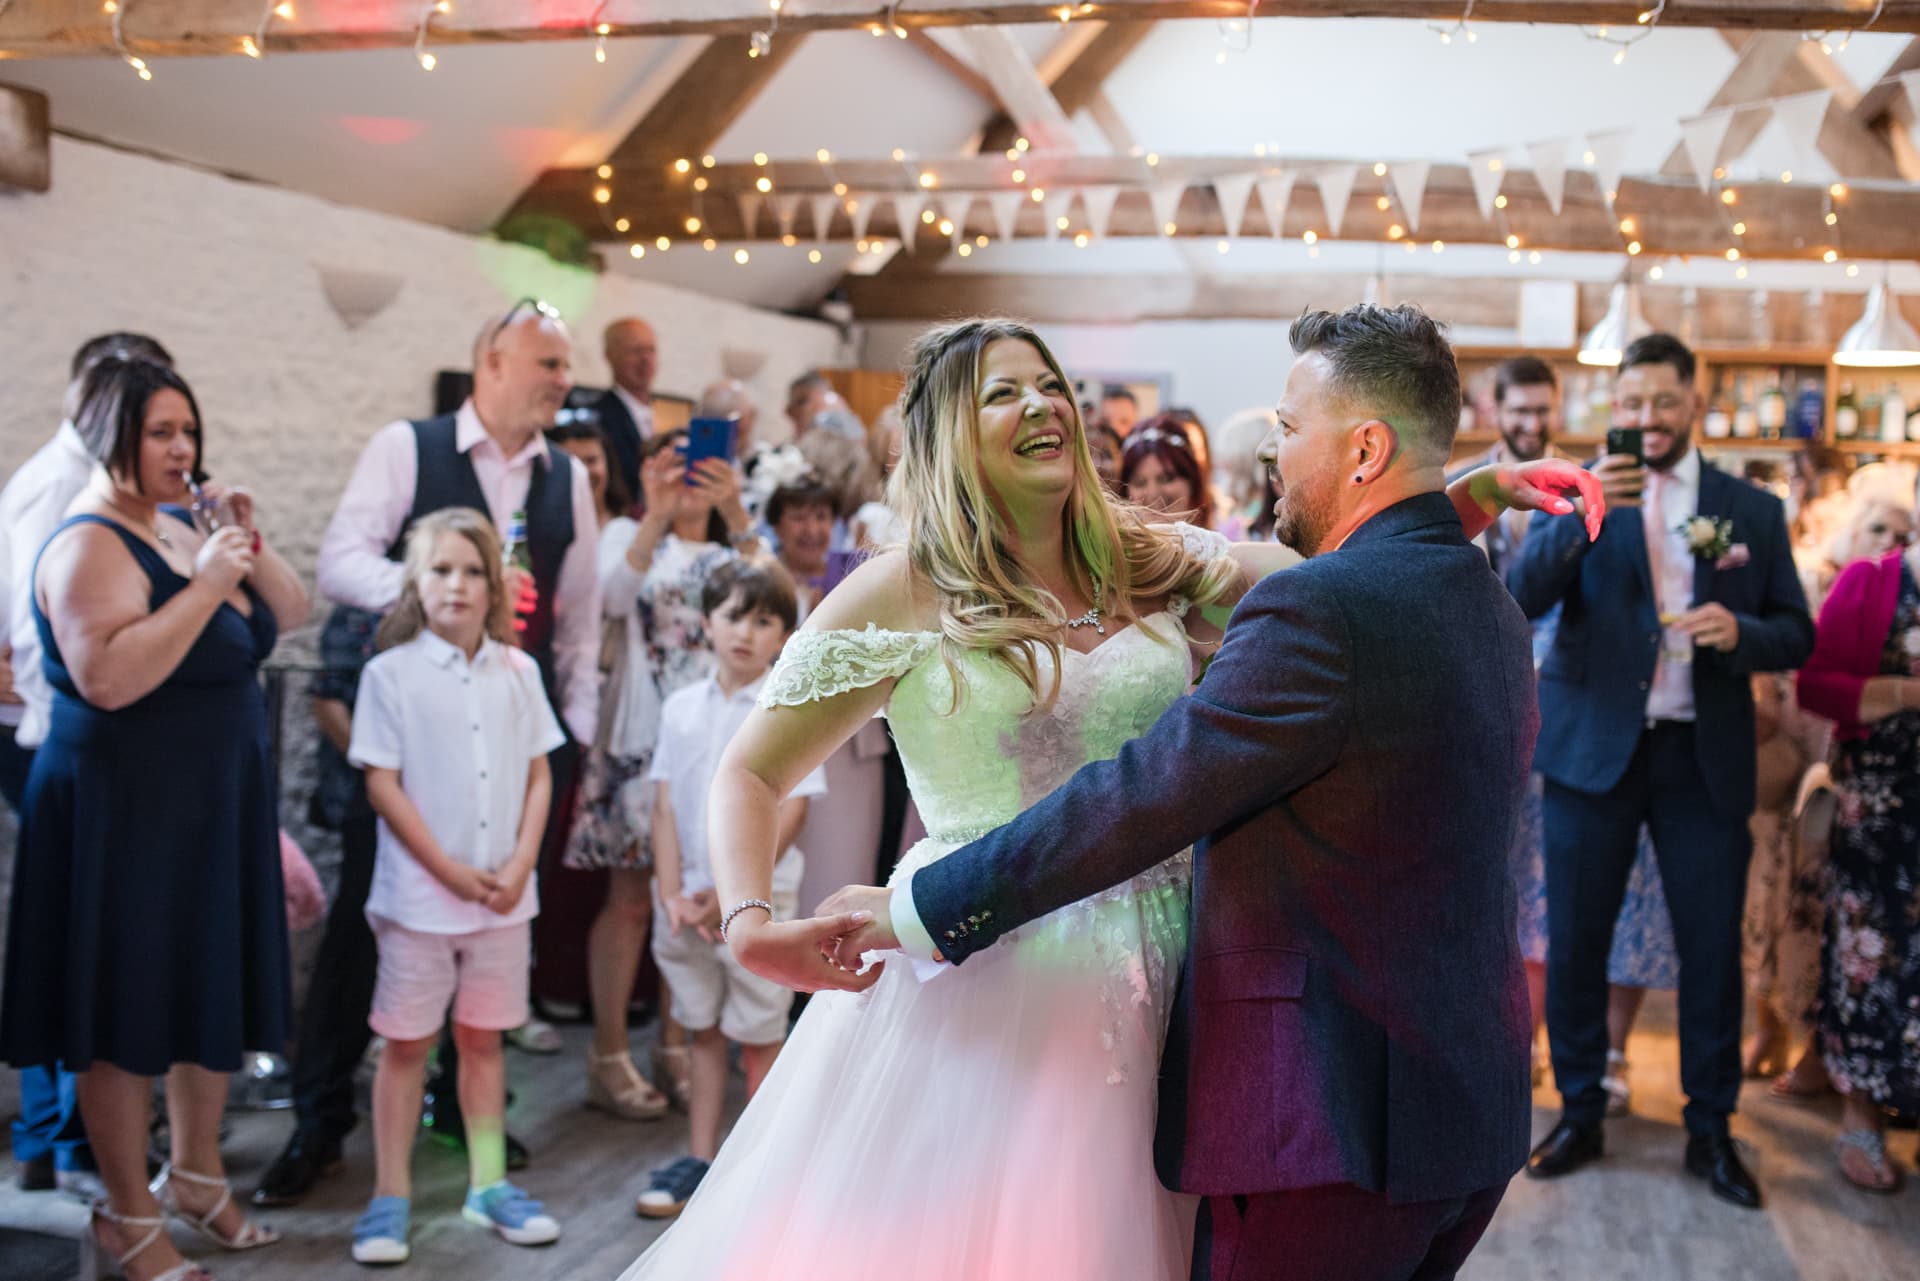 Bride and Groom first dance at Stratton Court Barn Wedding Venue